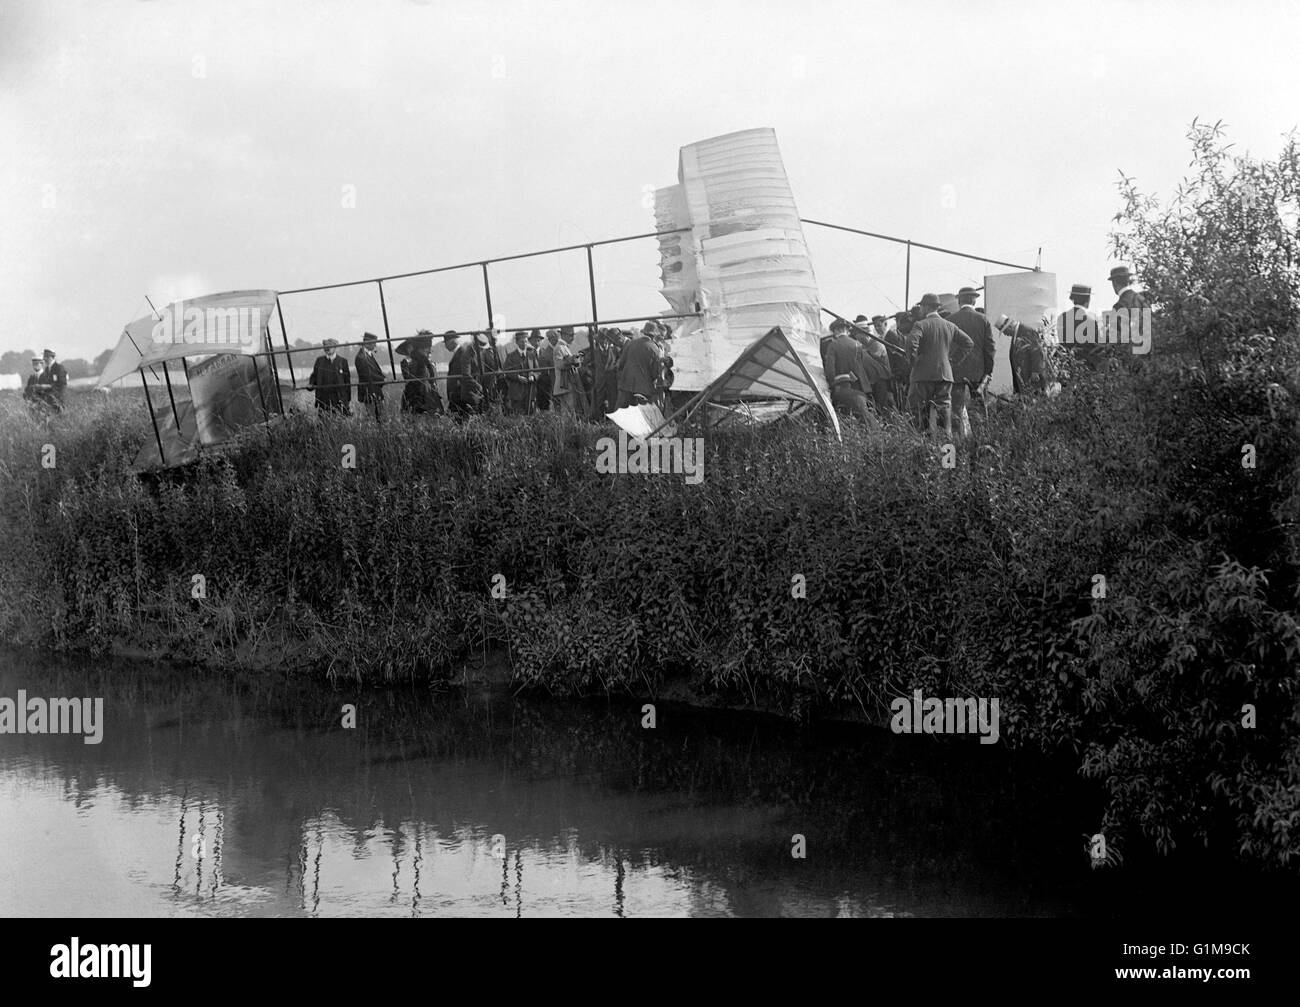 The smashed plane of Claude Grahame White and Lady Abdy after a flying accident at Brooklands. The right to fly as a passenger was offered at auction, and Lady Abdy won with a bid of 120 guineas for the first trip. The aircraft crashed after 500 yards, but neither pilot or passenger were seriously injured. ... Aviation - Claude Grahame White - Brooklands ... 01-06-1910 ... England ... Photo credit should read: PA/Unique Reference No. 7692673 ... Stock Photo